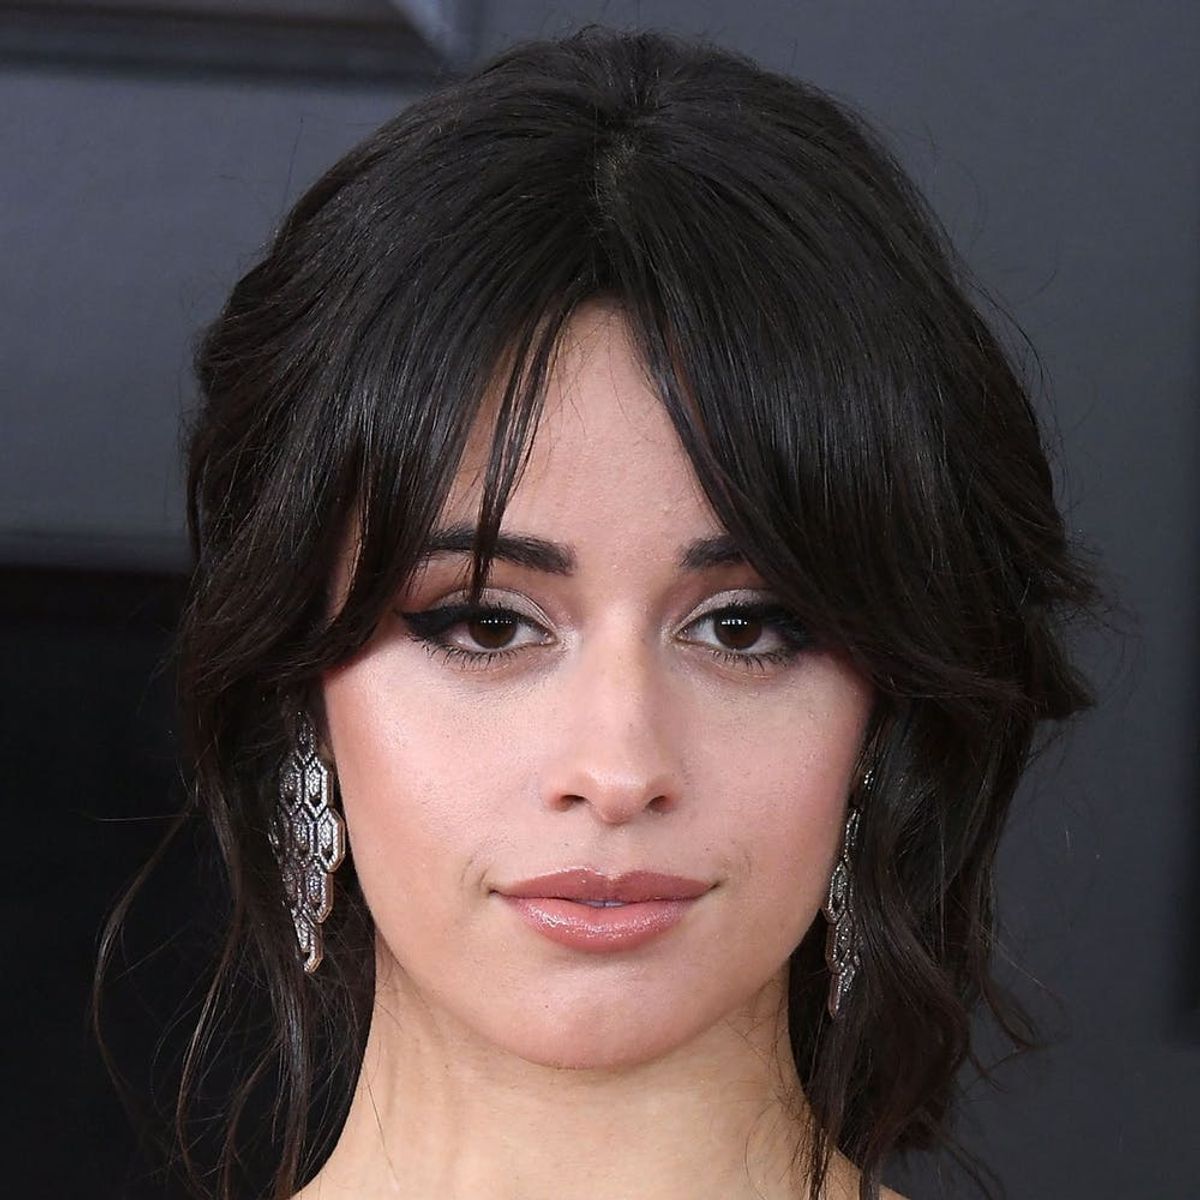 Camila Cabello Was Spotted Packing on the PDA With a New Beau in Cabo